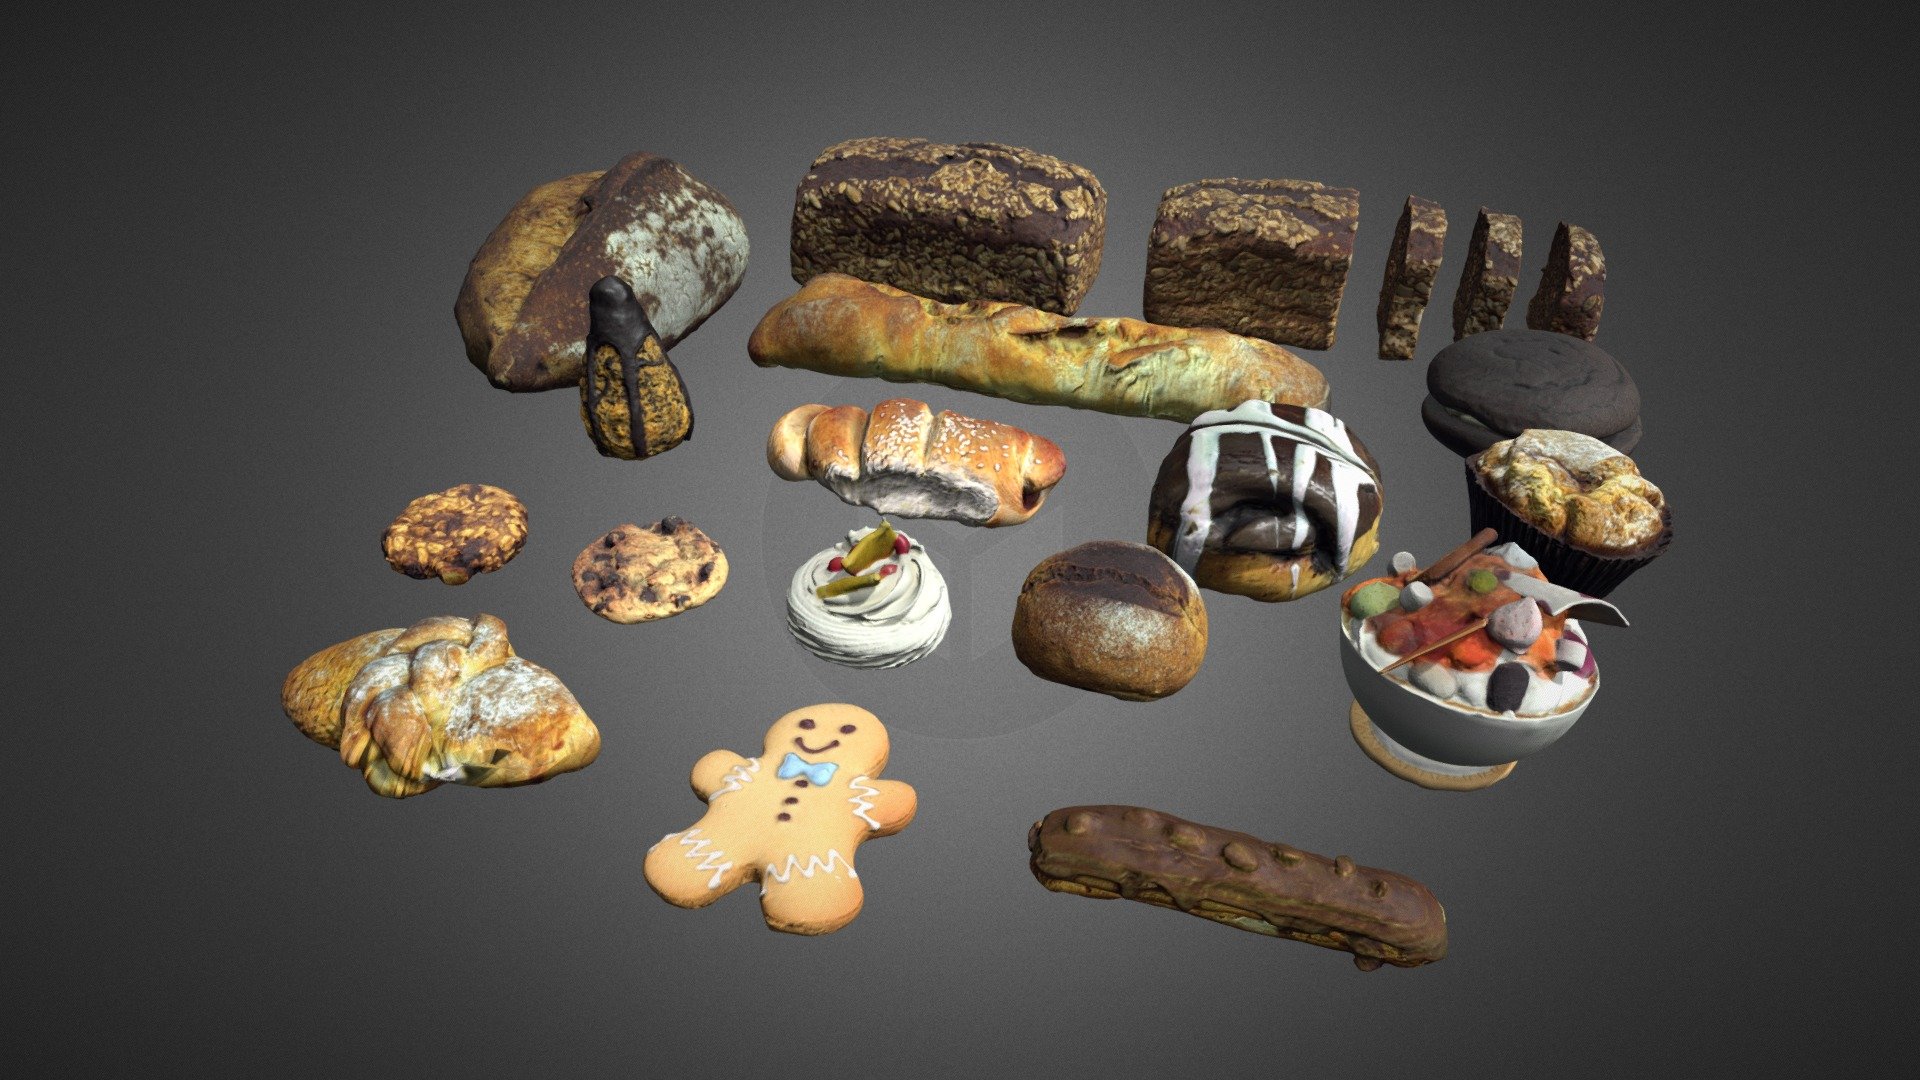 Bakery Pack



This high-quality model pack was created using photogrammetry. It can be used for games and architectural visualization.



Features:

The pack consists of 20 high quality baking objects.
 
The models have a Low poly LOD and a Mid poly LOD for close-ups
PBR photoscan-based materials

Assets Included:

BiscuitCake

BreadBrick

4 BreadBrickCut

BreadGray

BunGlaze

BunGray

Cake

CakeAnthill

CookieChocolate

CupCake

Eclair

FrenchBread

GingerbreadMan

MeringuePie

OatCookies

Pigtail

Sausage



Technical Details:

Texture Sizes: 2048x2048

LODs: 2

Number of Meshes: 40

Number of Materials: 40

Number of Textures: 120 (Base Color, Normal Map, Roughness)

Intended Platforms: Desktop
 - Bakery Pack - Buy Royalty Free 3D model by CG Duck (@cg_duck) 3d model